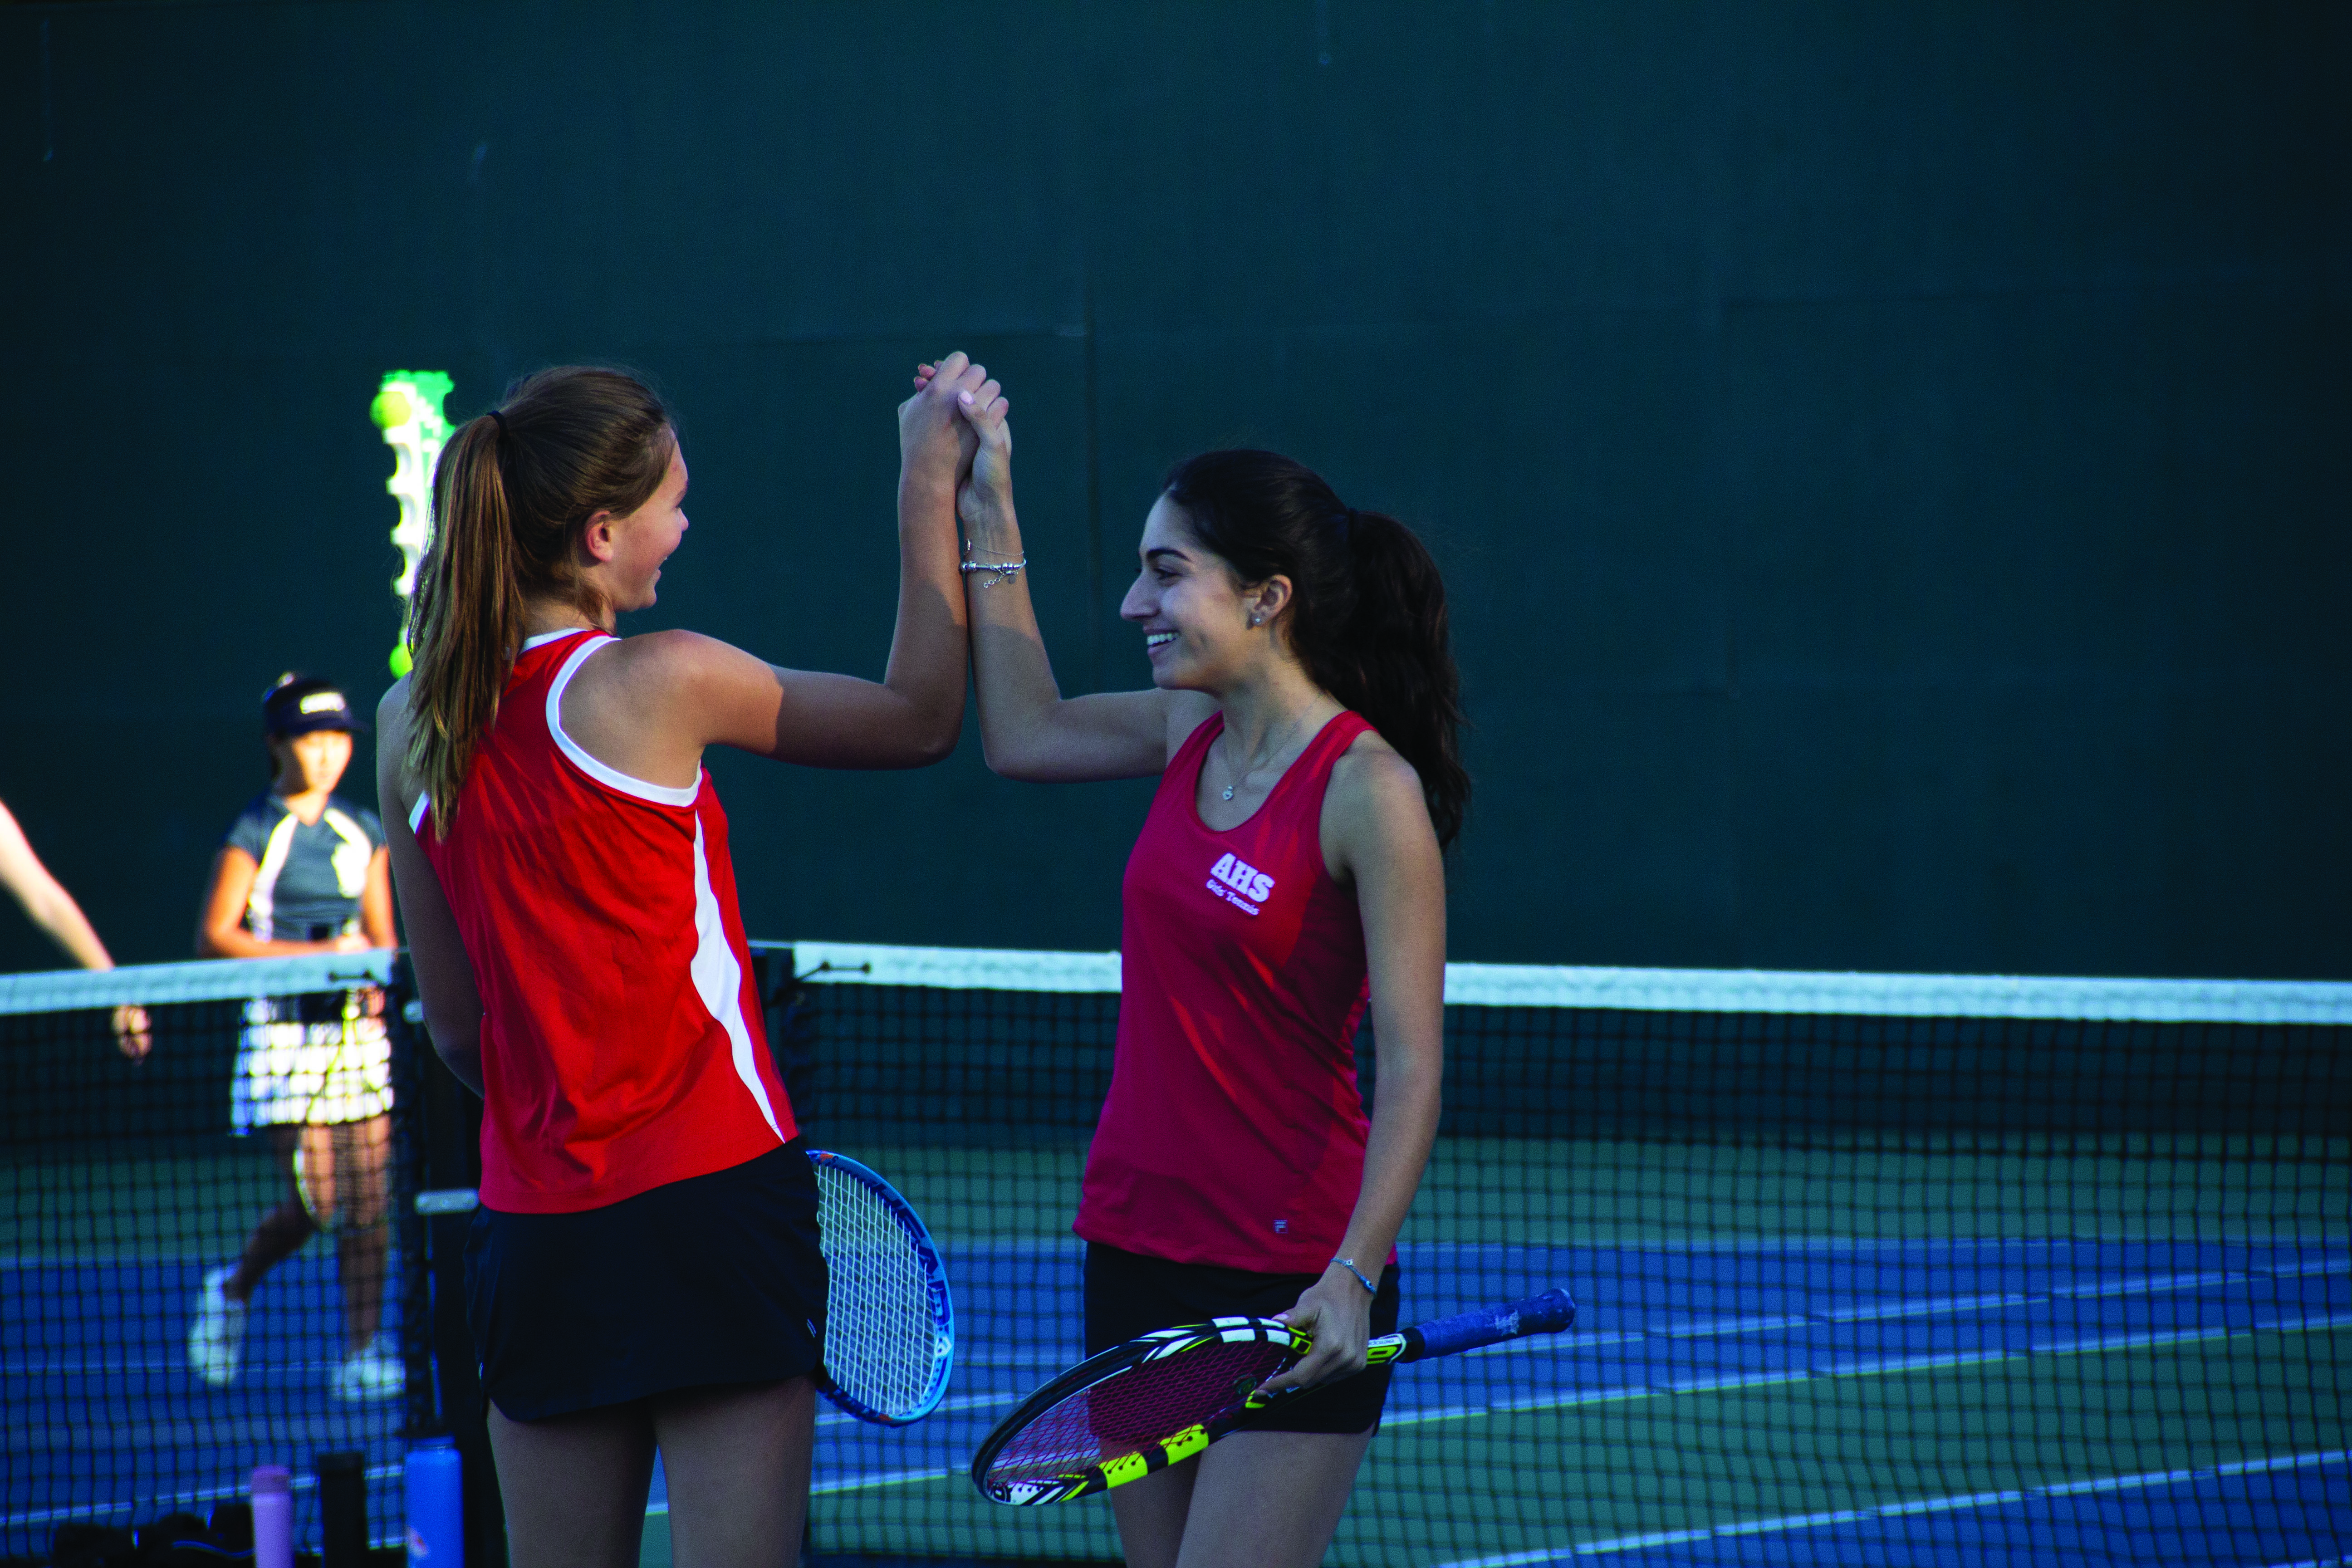 Seniors Yasmina Malouf and Marie Pachtner high five after winning a point.